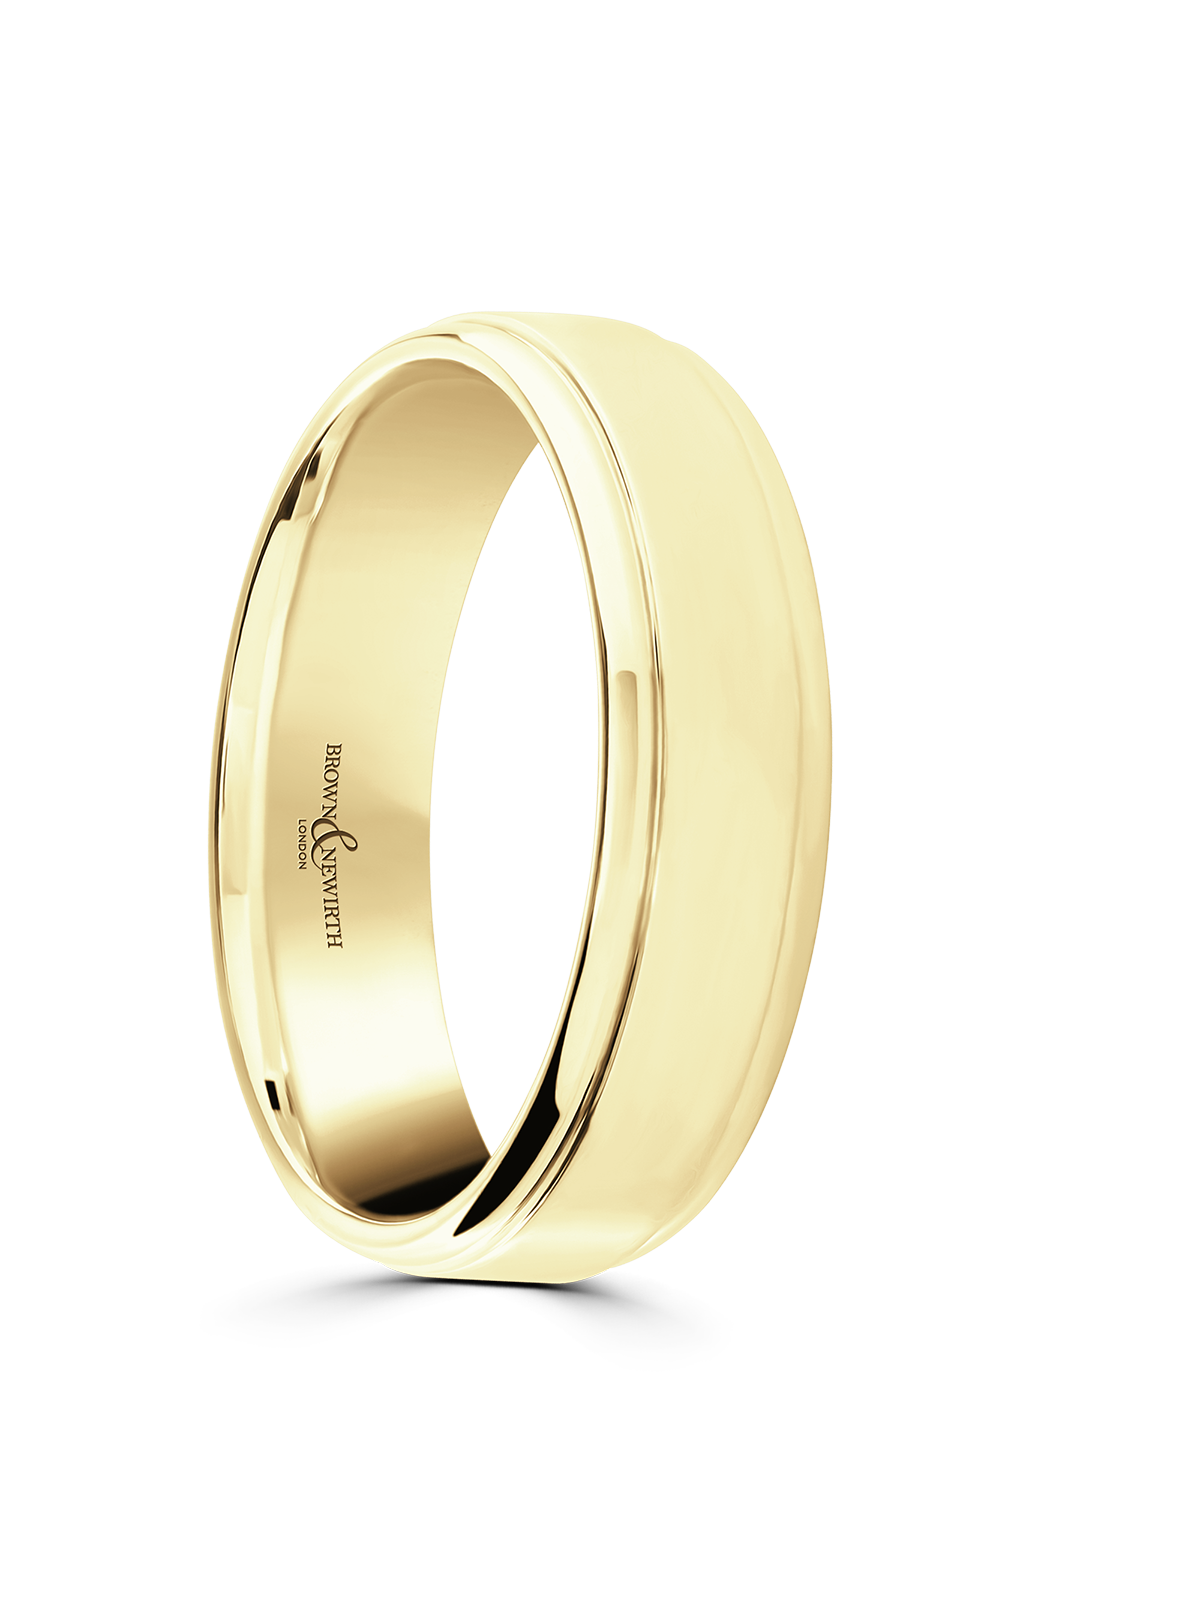 Brown & Newirth Gravity 5mm Patterned Wedding Ring in 9ct Yellow Gold